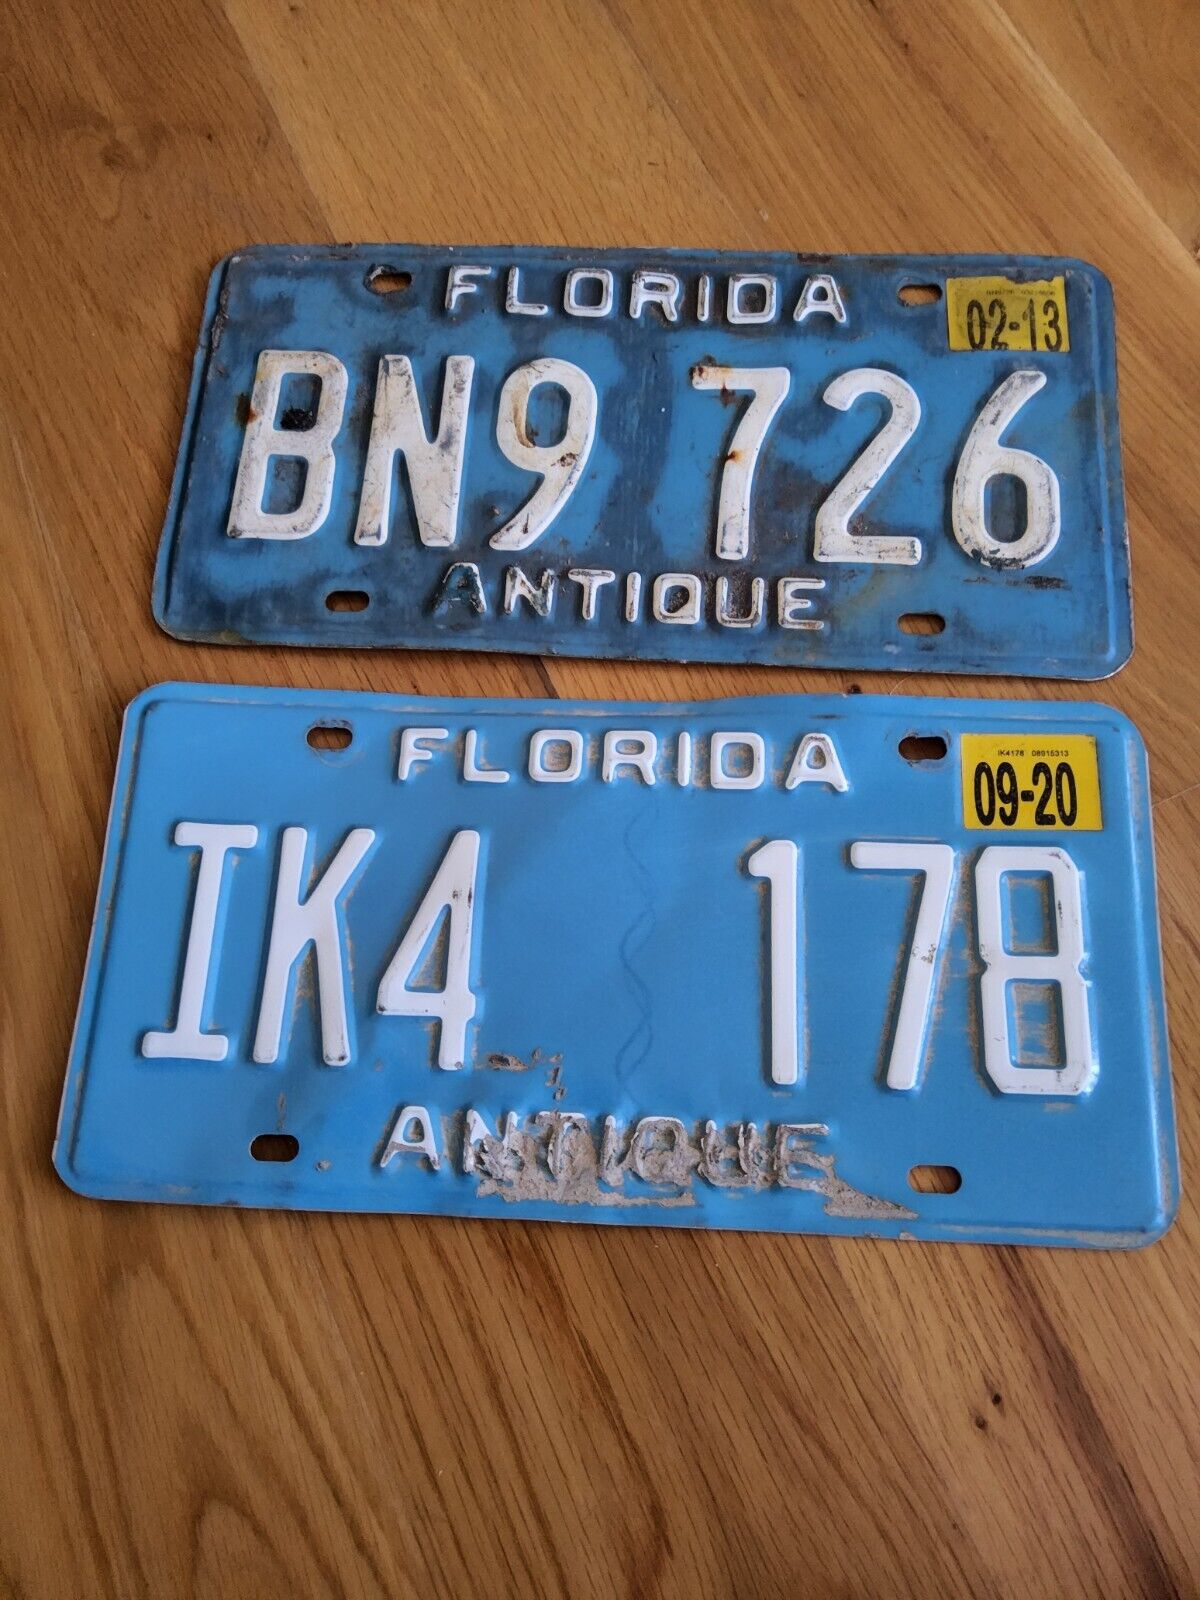 FLORIDA Antique blue plate expired  Plates  Pick one X